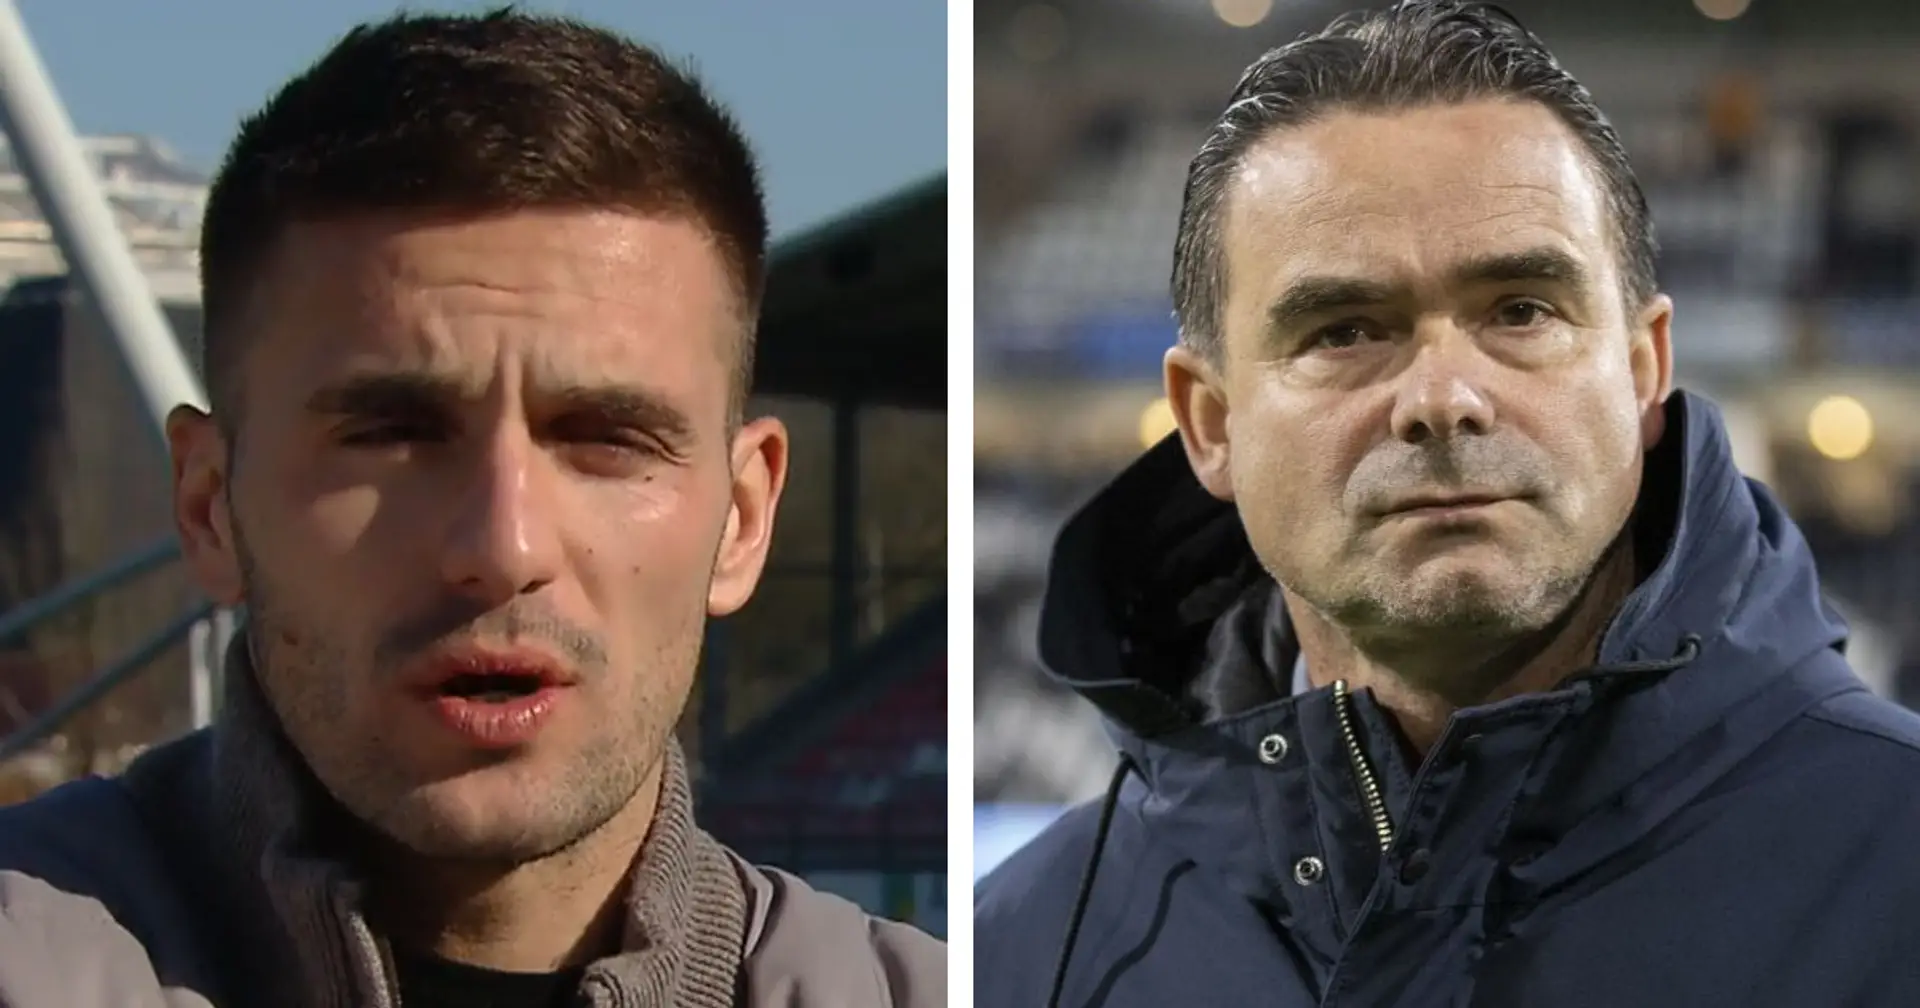 'Everyone makes mistakes': Ajax forward Dusan Tadic defends Marc Overmars after quitting for harassing female employees